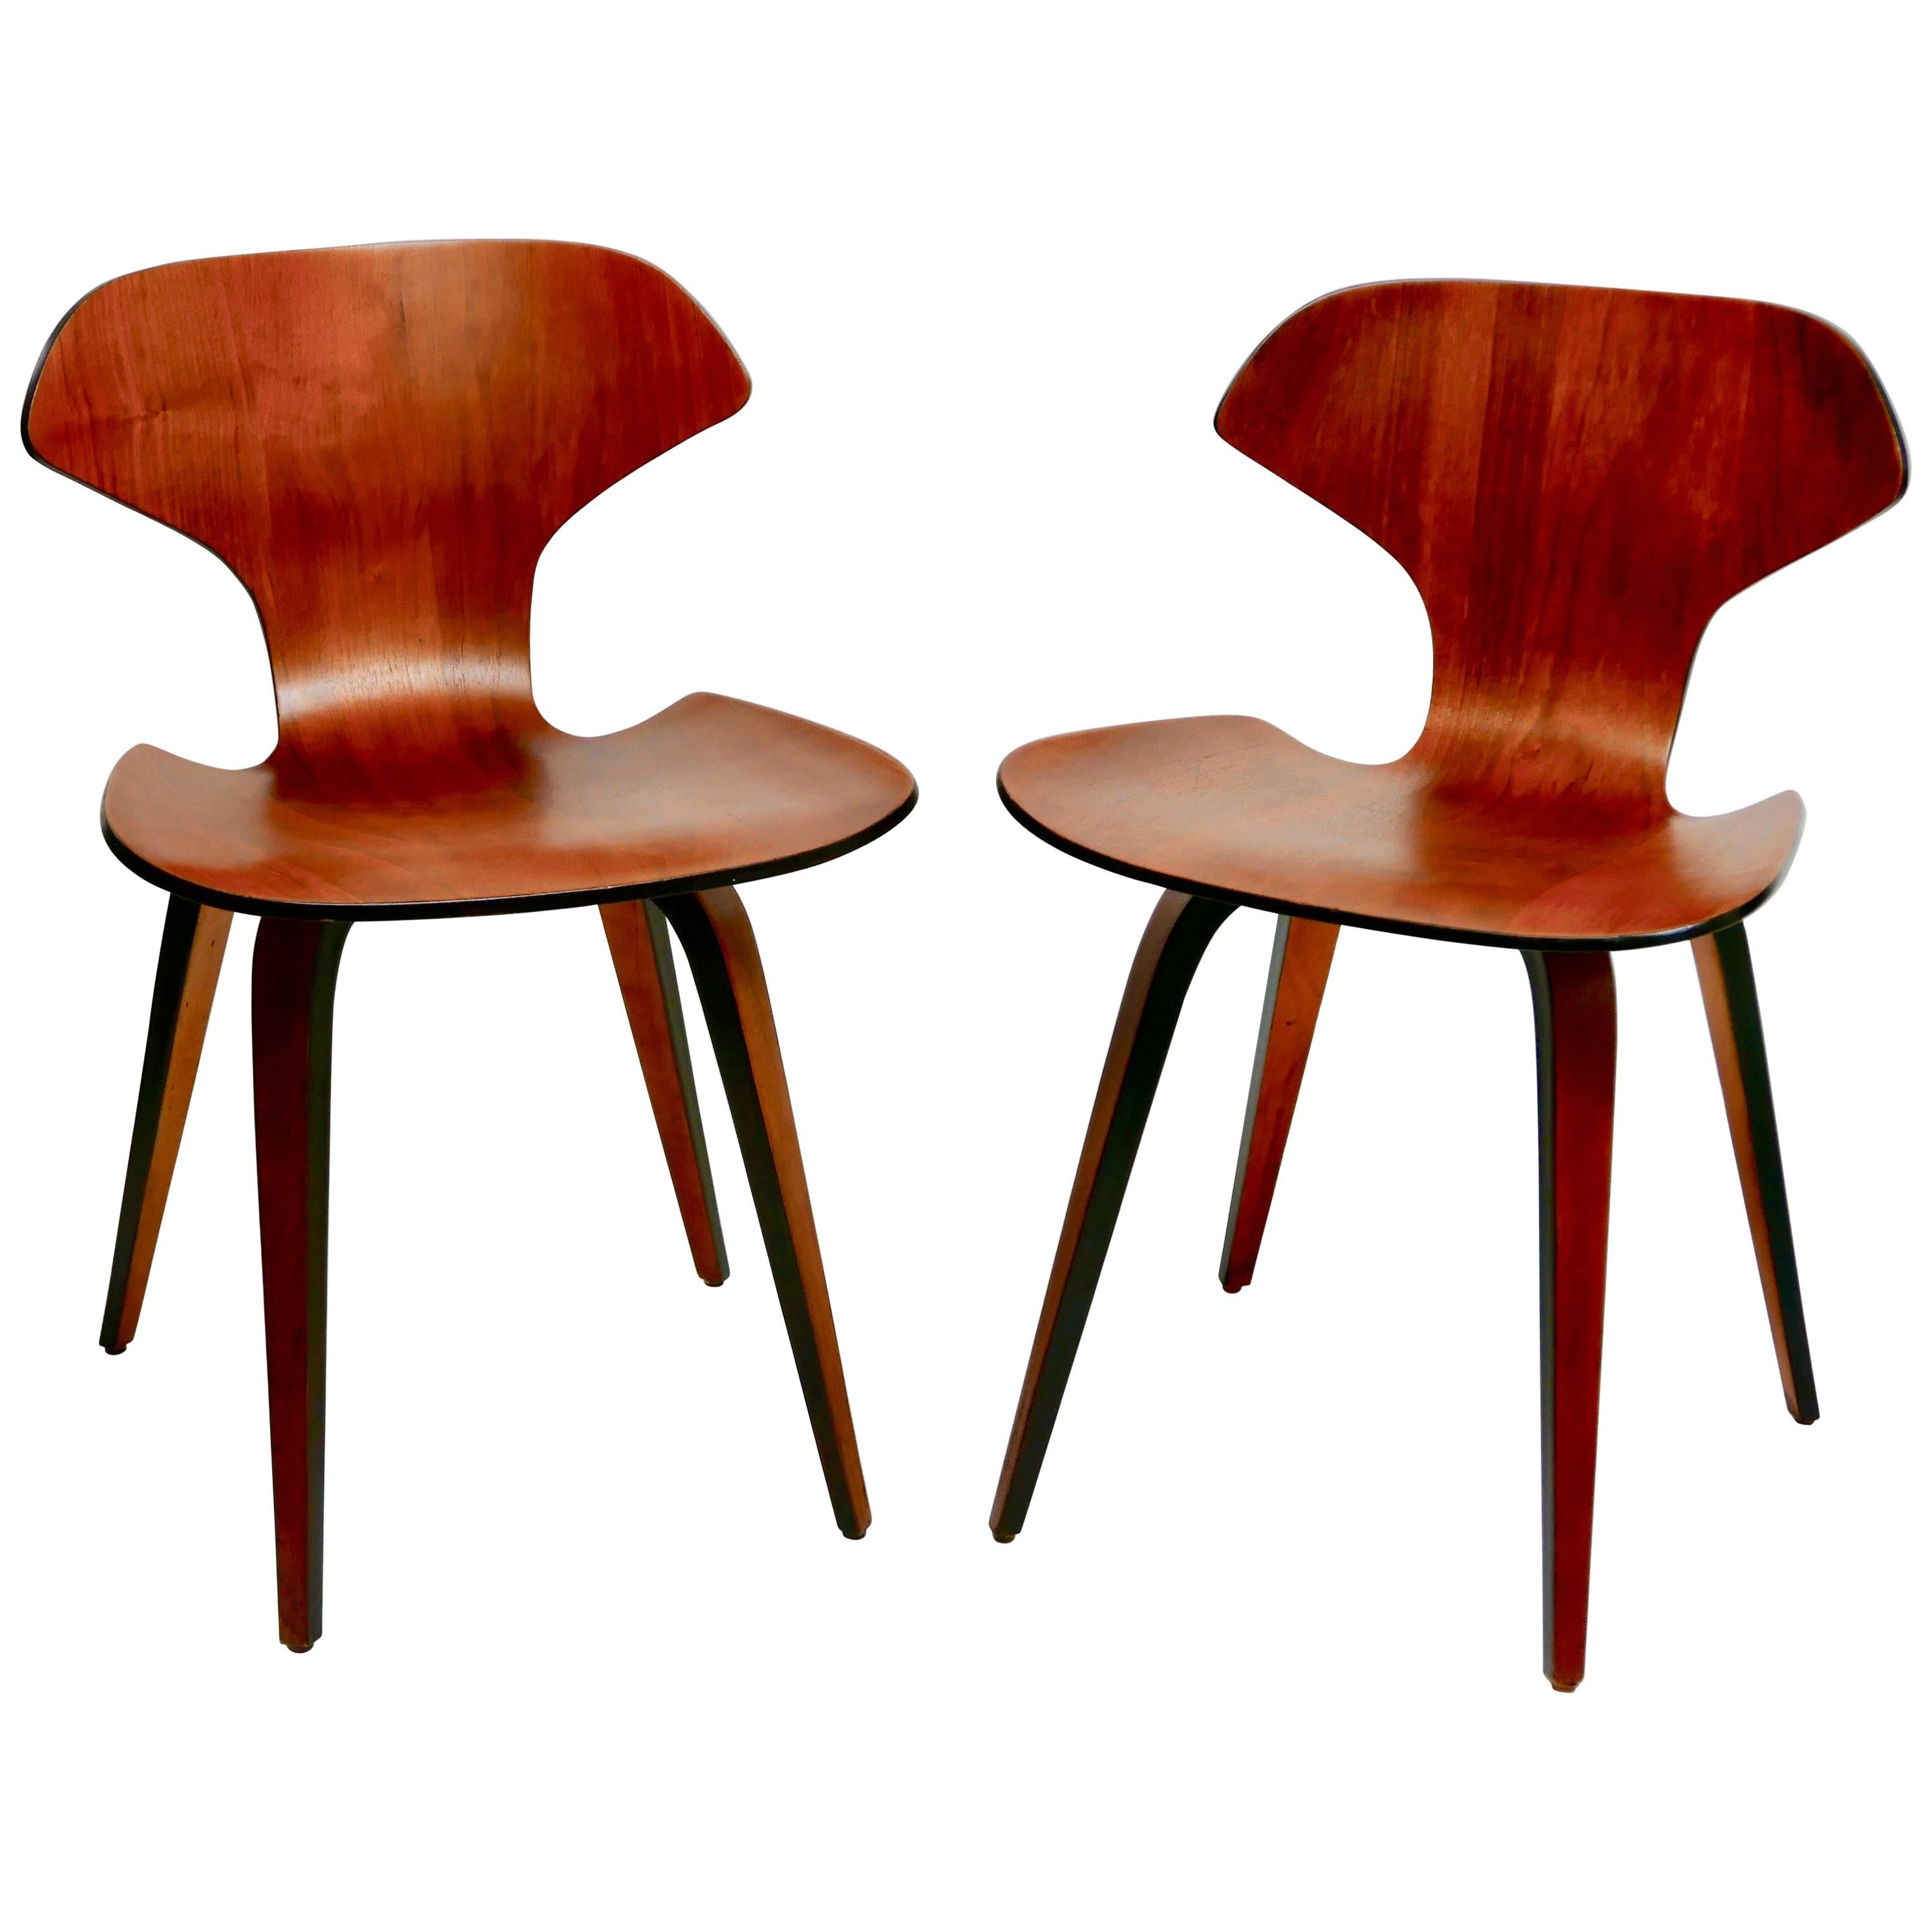 Pair of Mid-Century Modern George Mulhauser Plywood Side Chairs by Plycraft